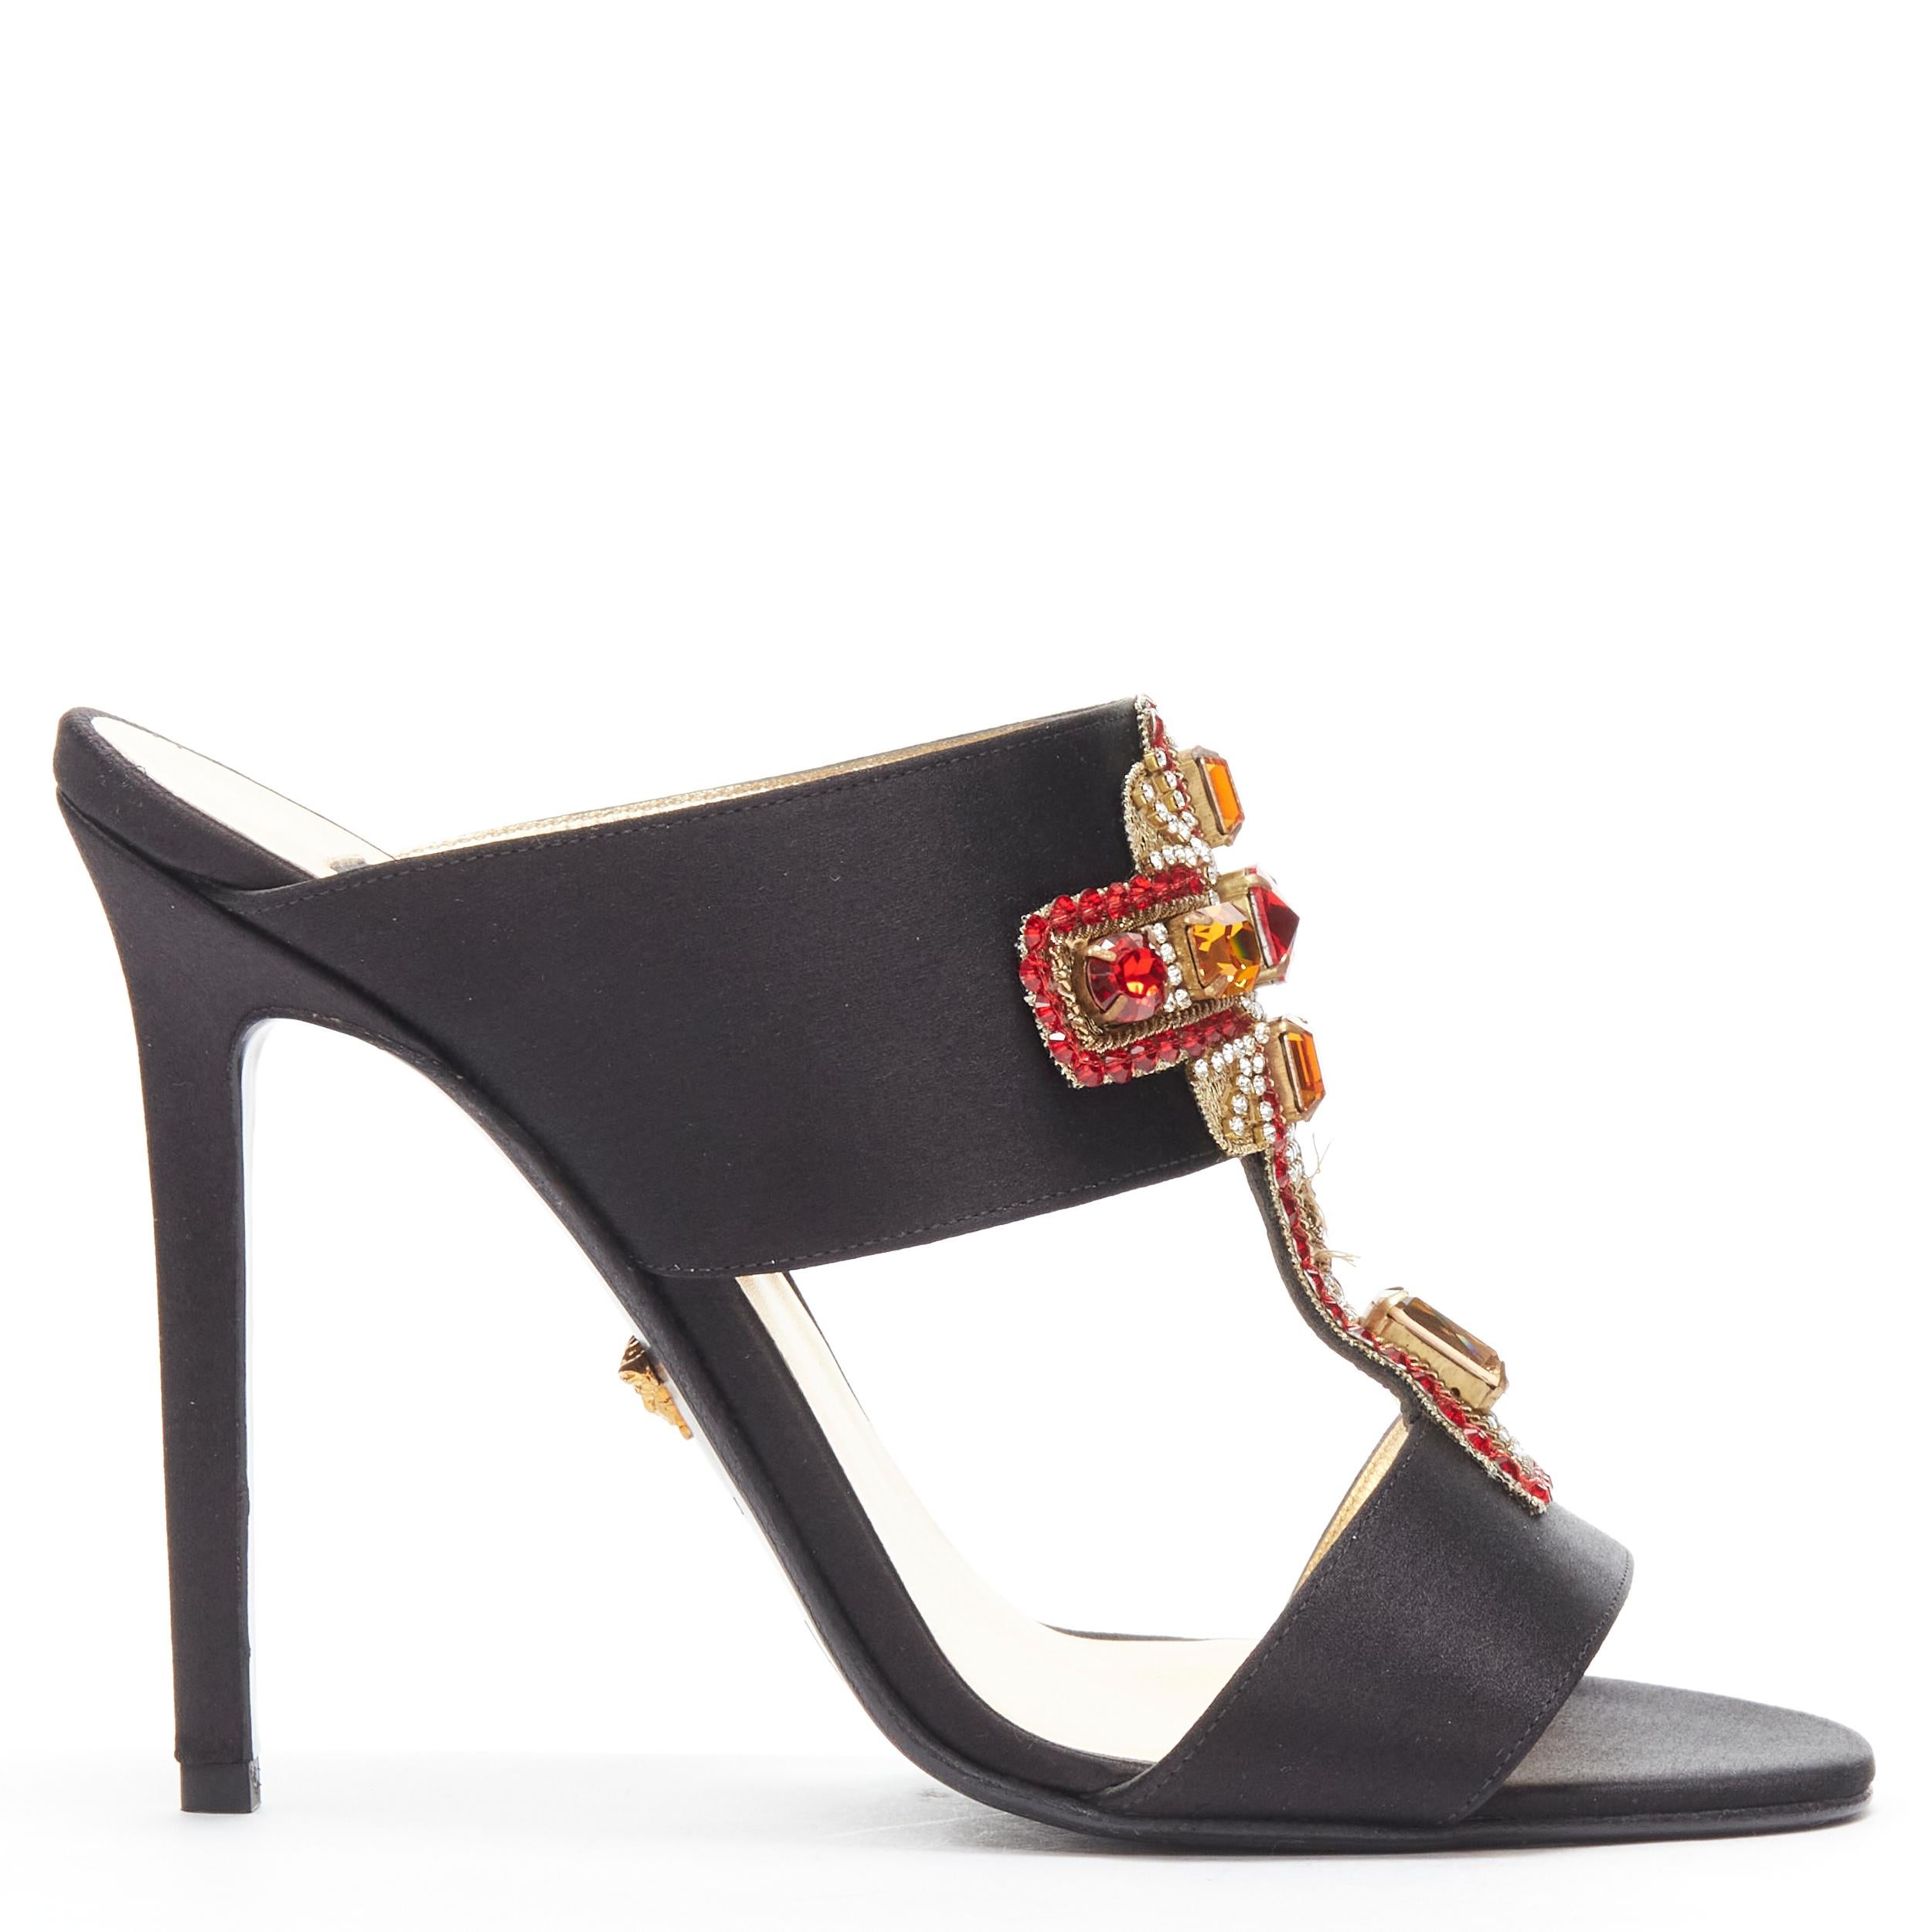 new VERSACE 2018 Tribute Byzantine Cross Jewel crystal black satin sandals EU38
Reference: TGAS/A04792
Brand: Versace
Designer: Donatella Versace
Collection: Spring Summer 2018 Runway
Material: Silk 
Color: Black 
Pattern: Solid 
Extra Detail: Black